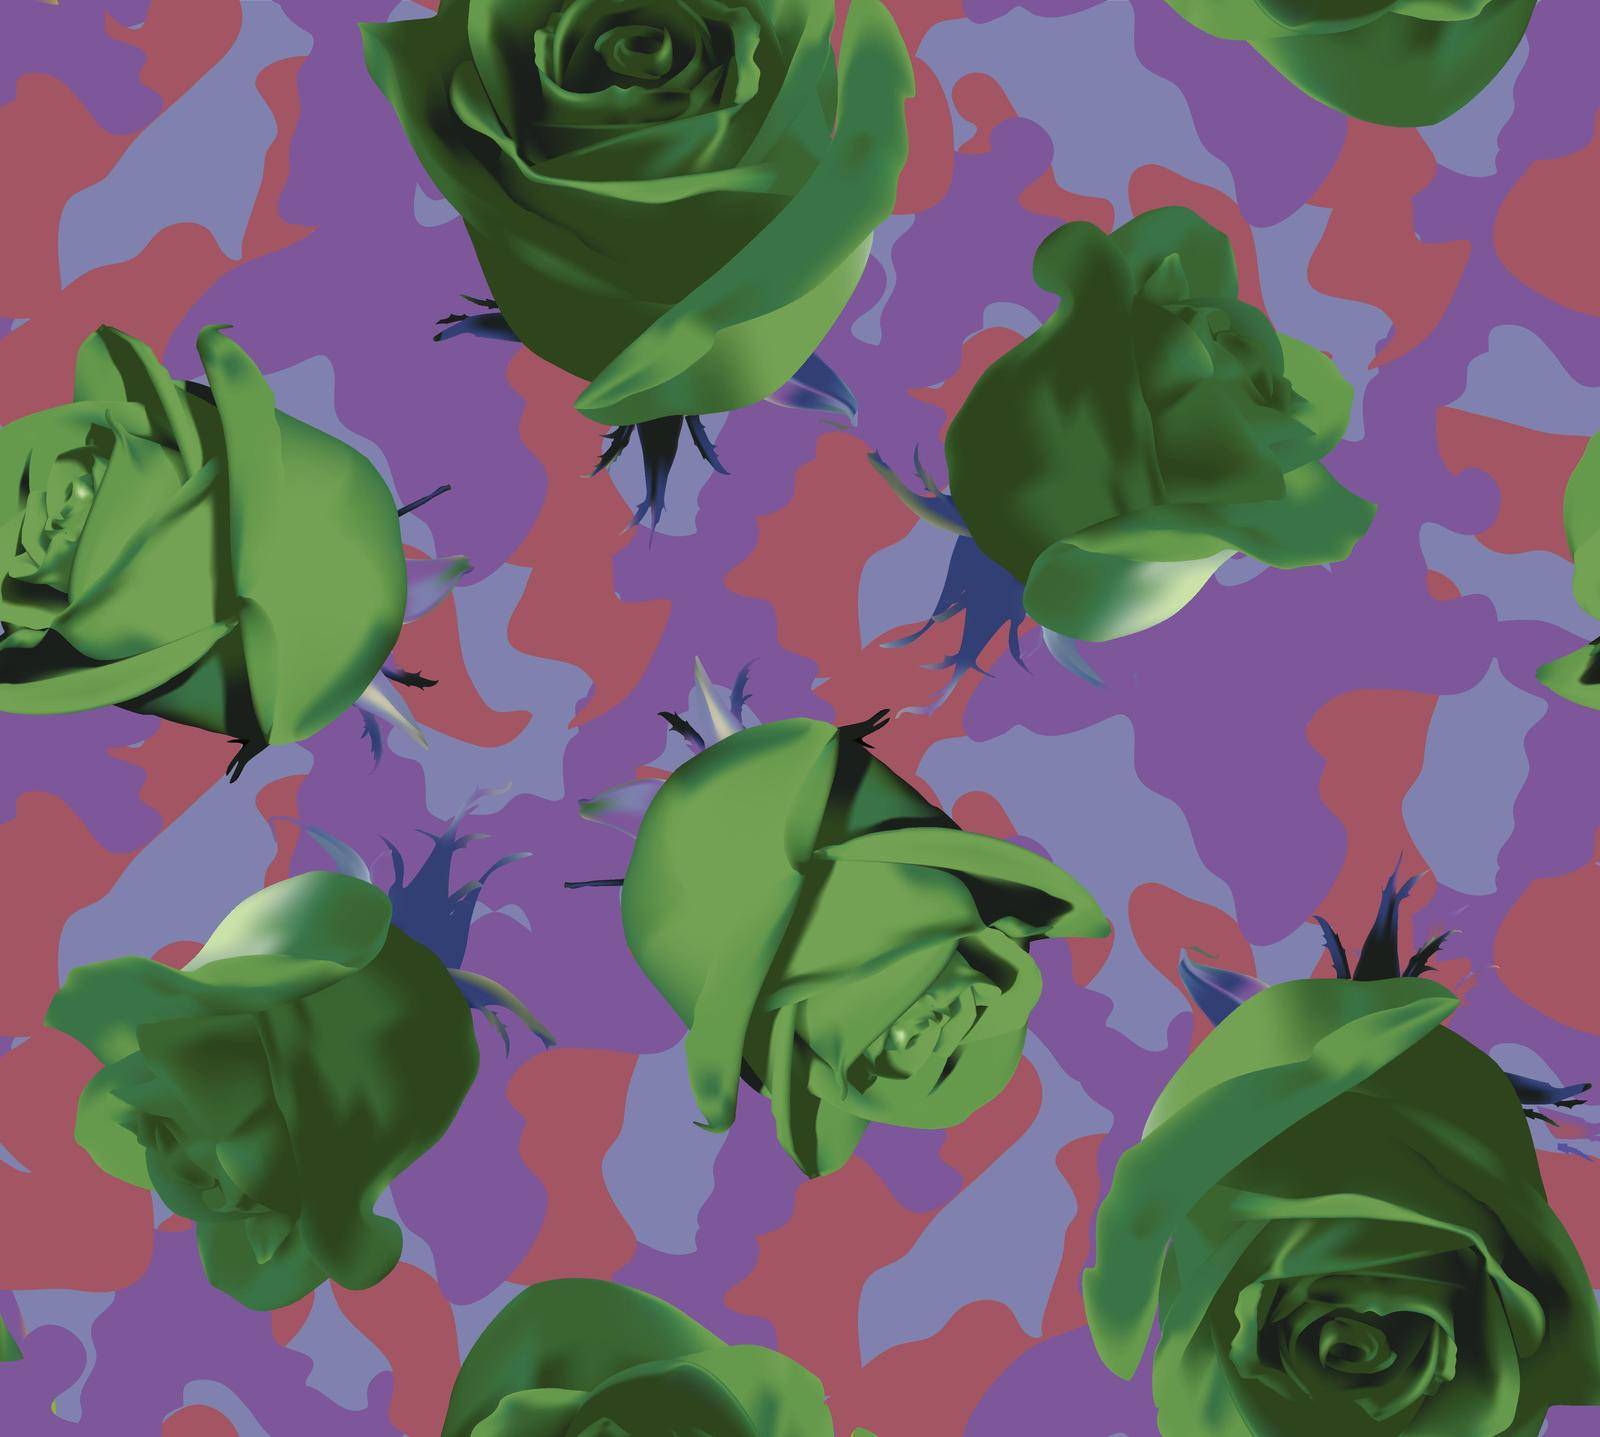 Fashionable camouflage violet and pink pattern with green roses by mlanaa